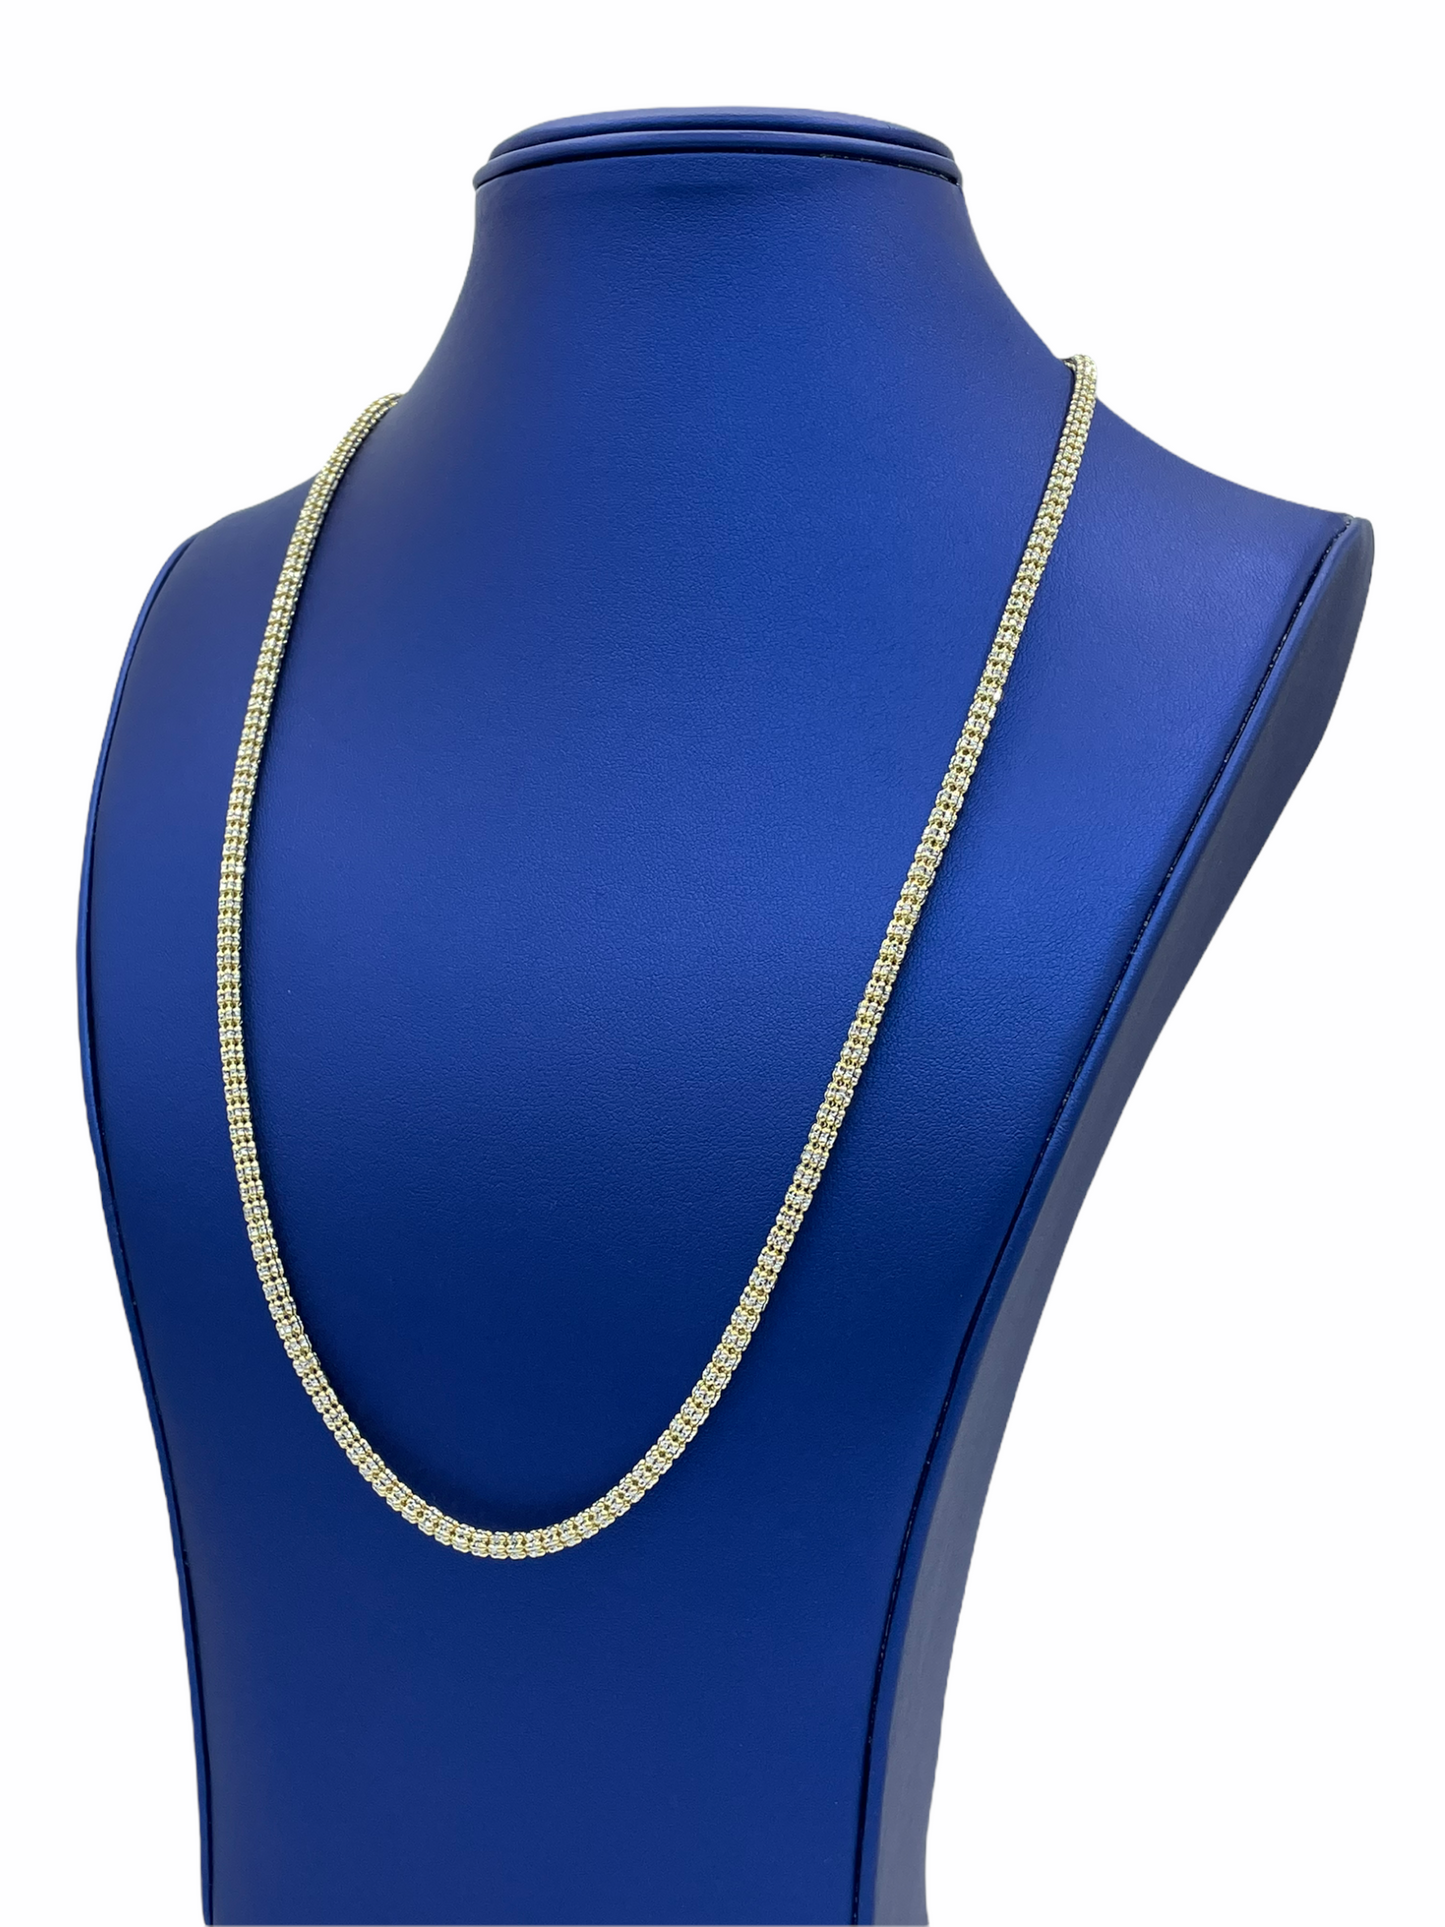 14K Iced Choker  (24”- 4 mm)Yellow Gold by GD ™ - Gold Drip Jewelry